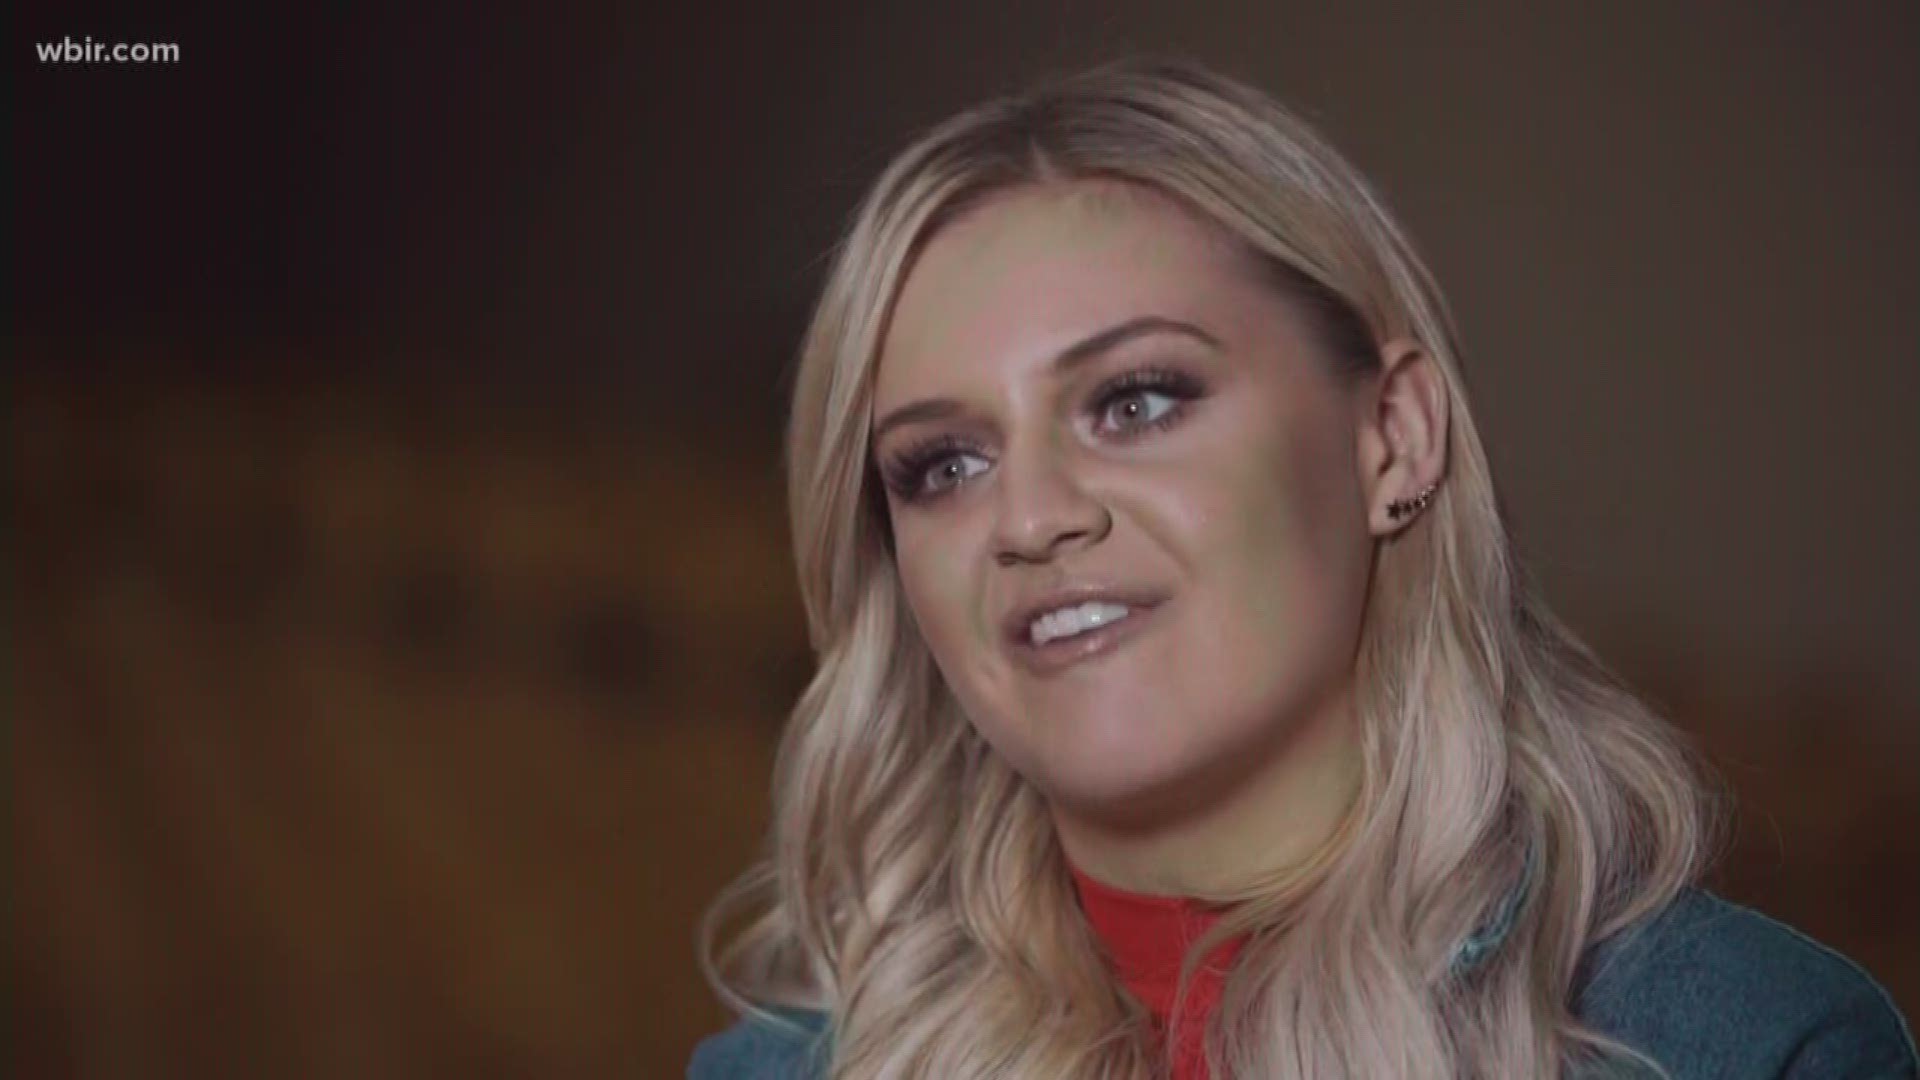 Nov. 2, 2017: Kelsea Ballerini reminisces on high school, and talks to WBIR anchor Beth Haynes about her upcoming album release, wedding and tour.